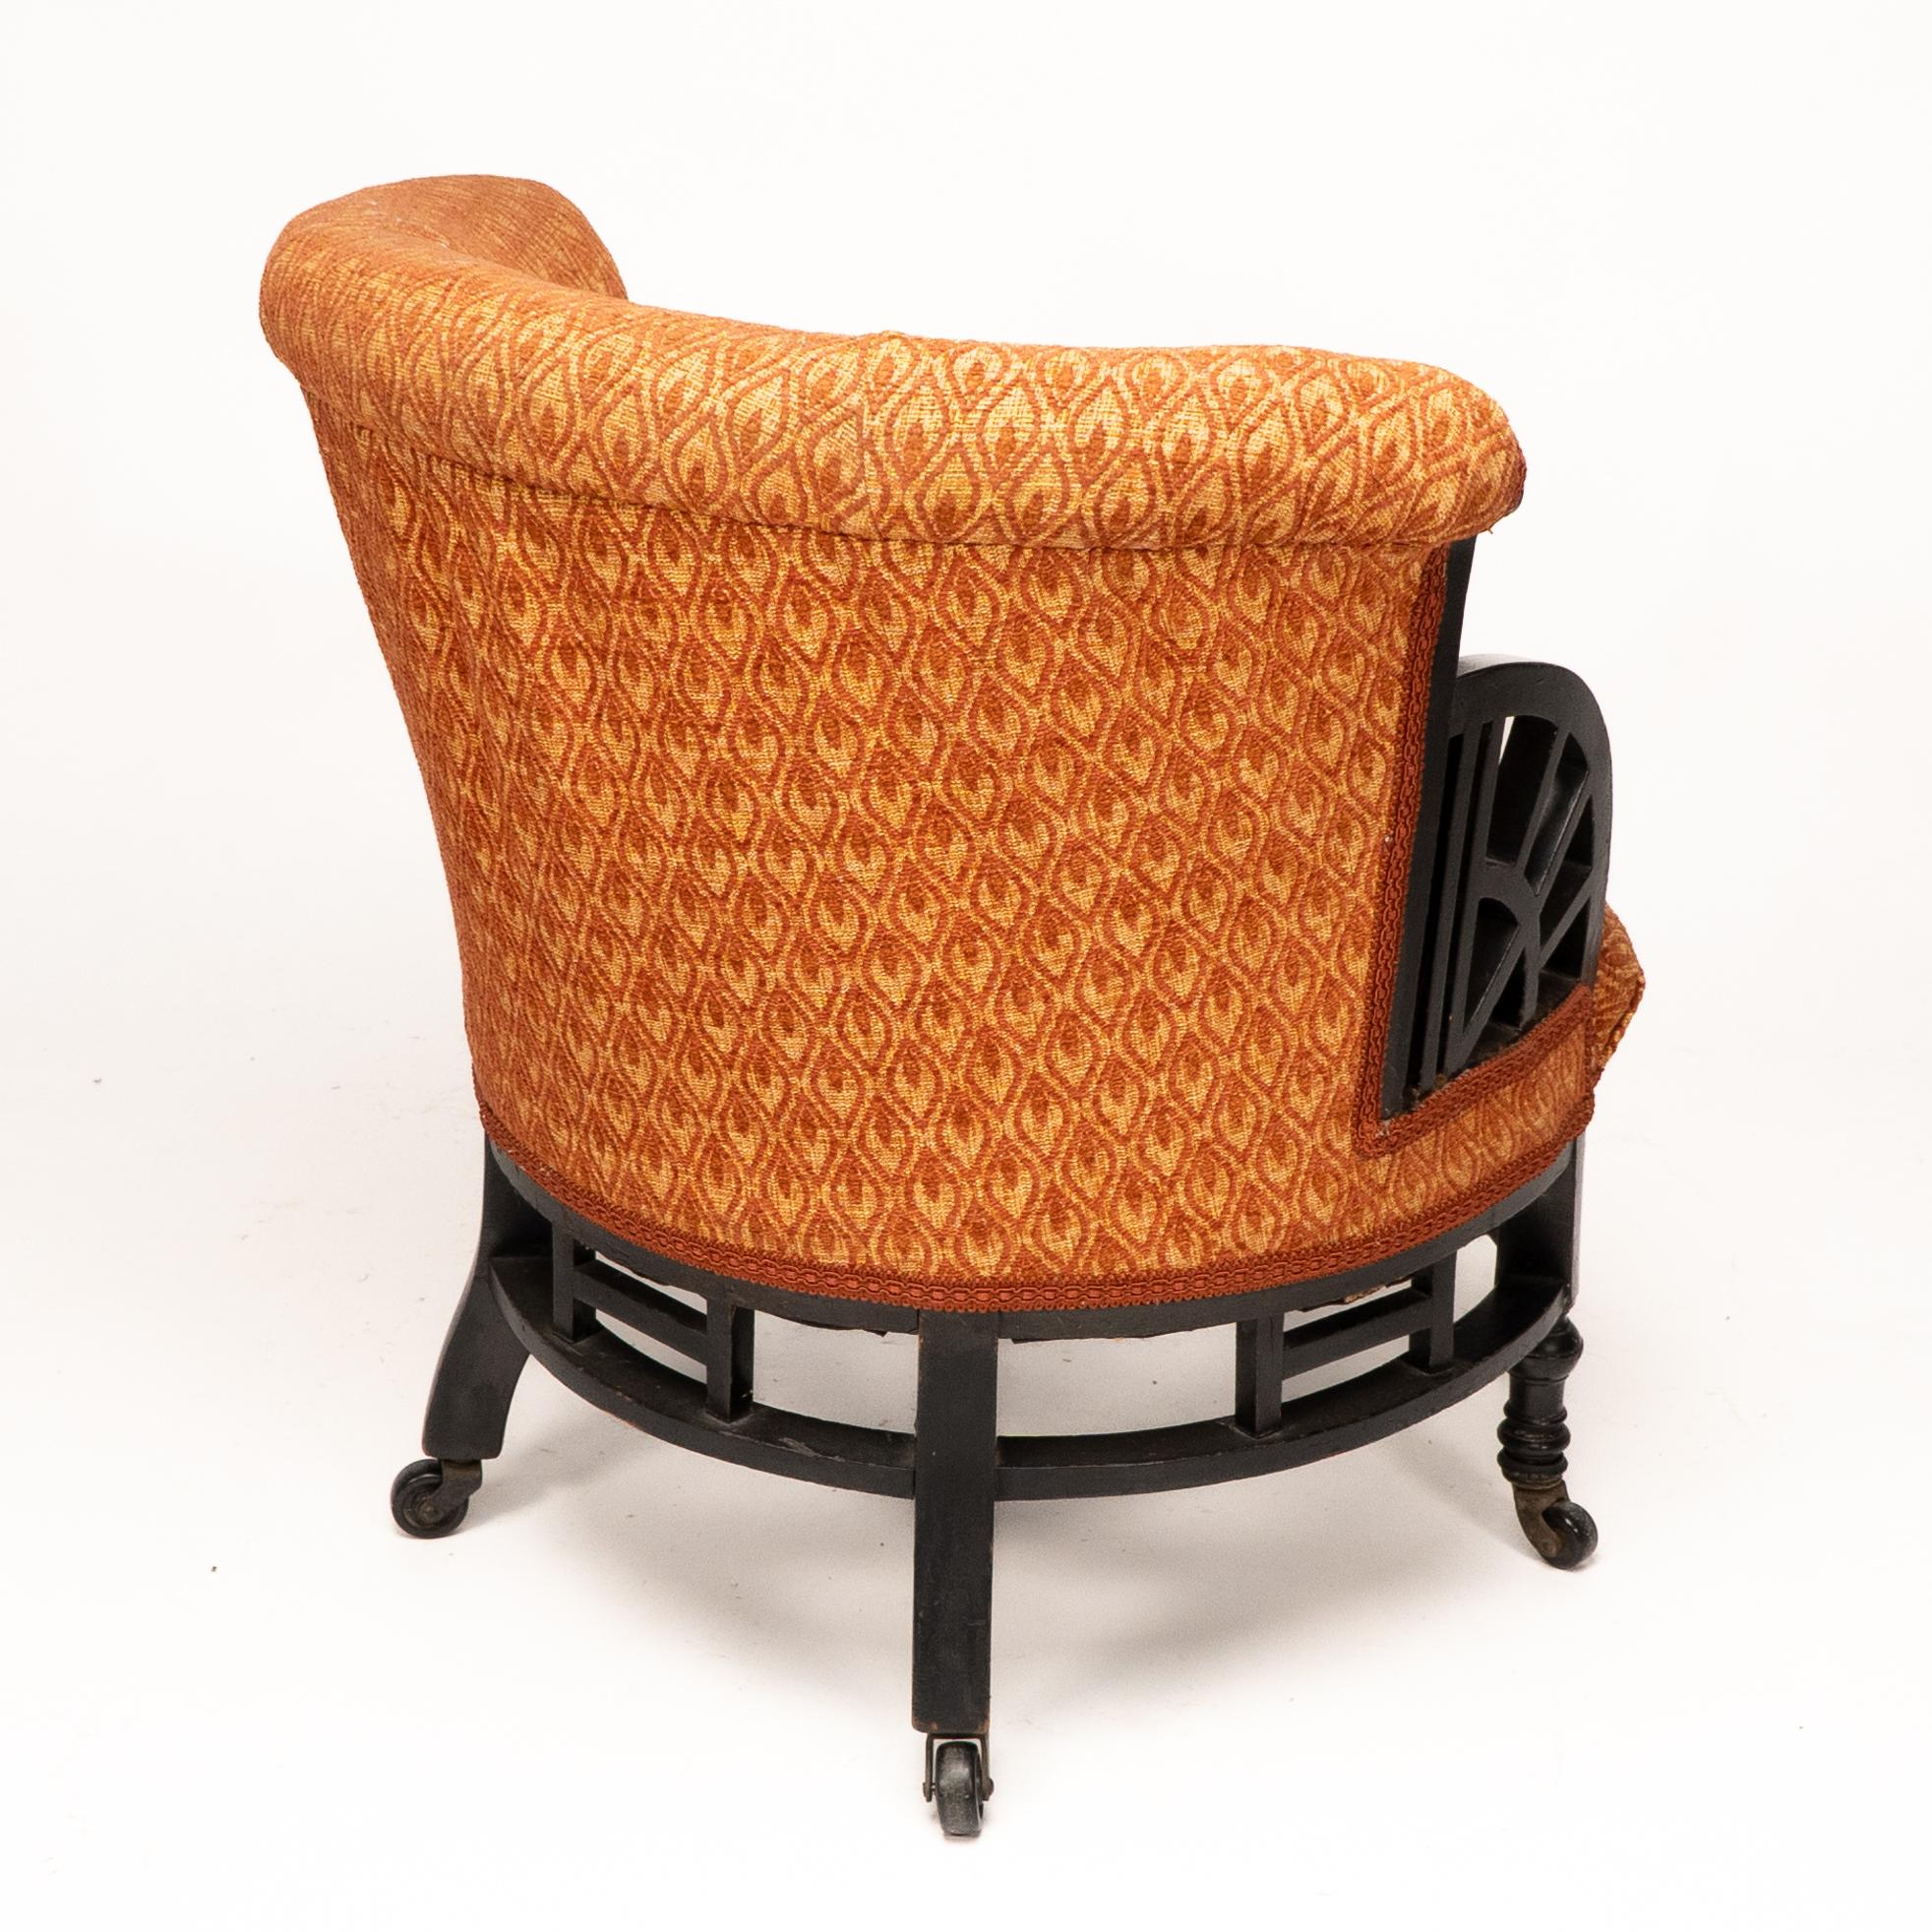 E W Godwin attri. An Anglo-Japanese circular armchair with fan shaped arms For Sale 12